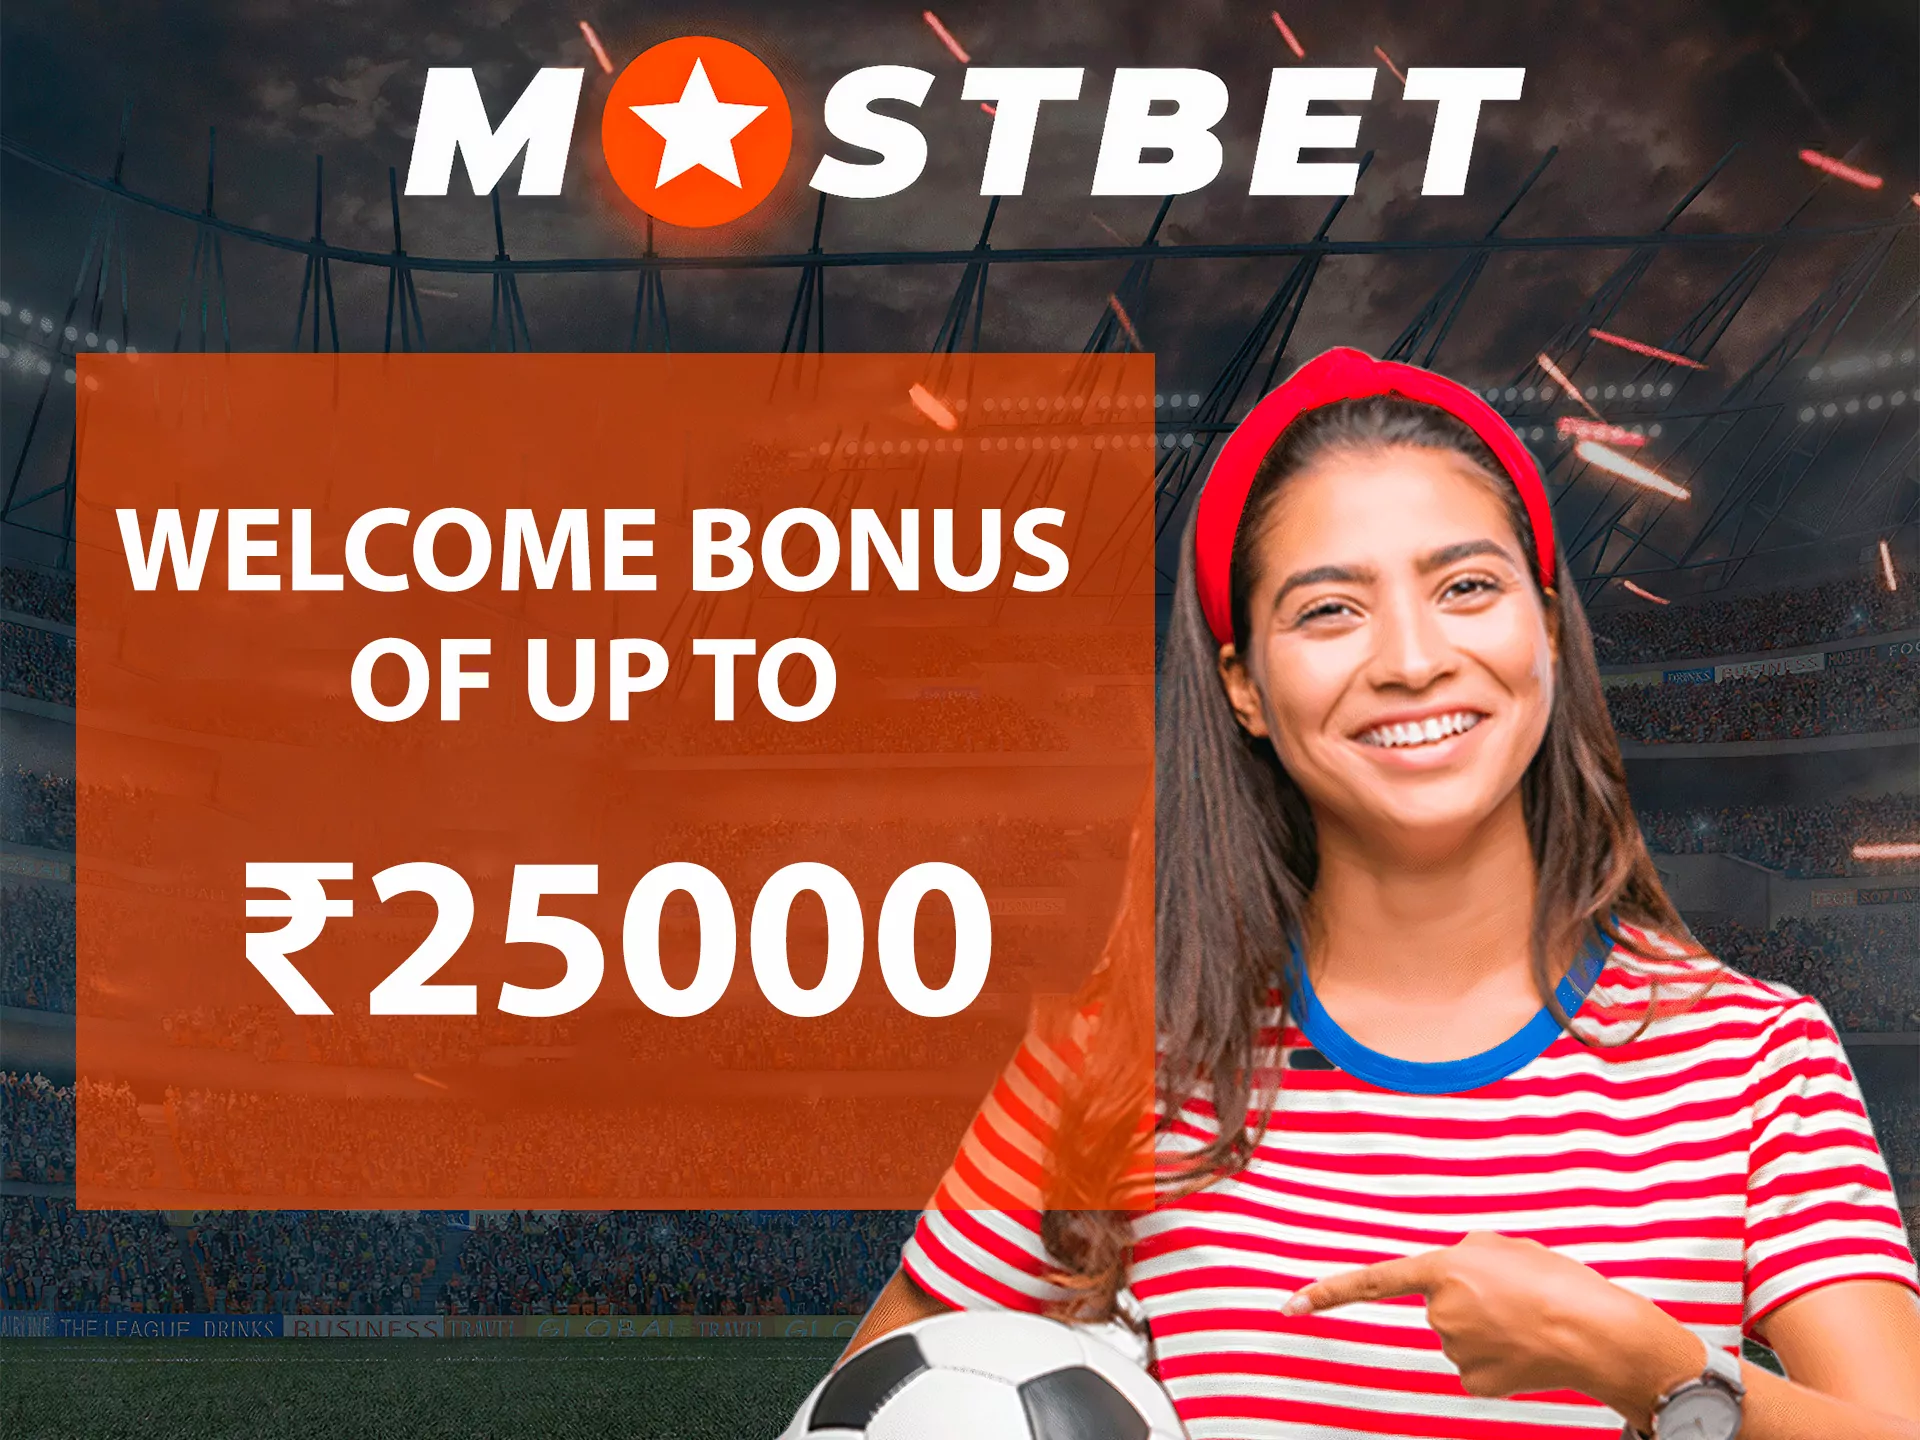 Get a welcome bonus of 25,000 rupees on your first deposit.